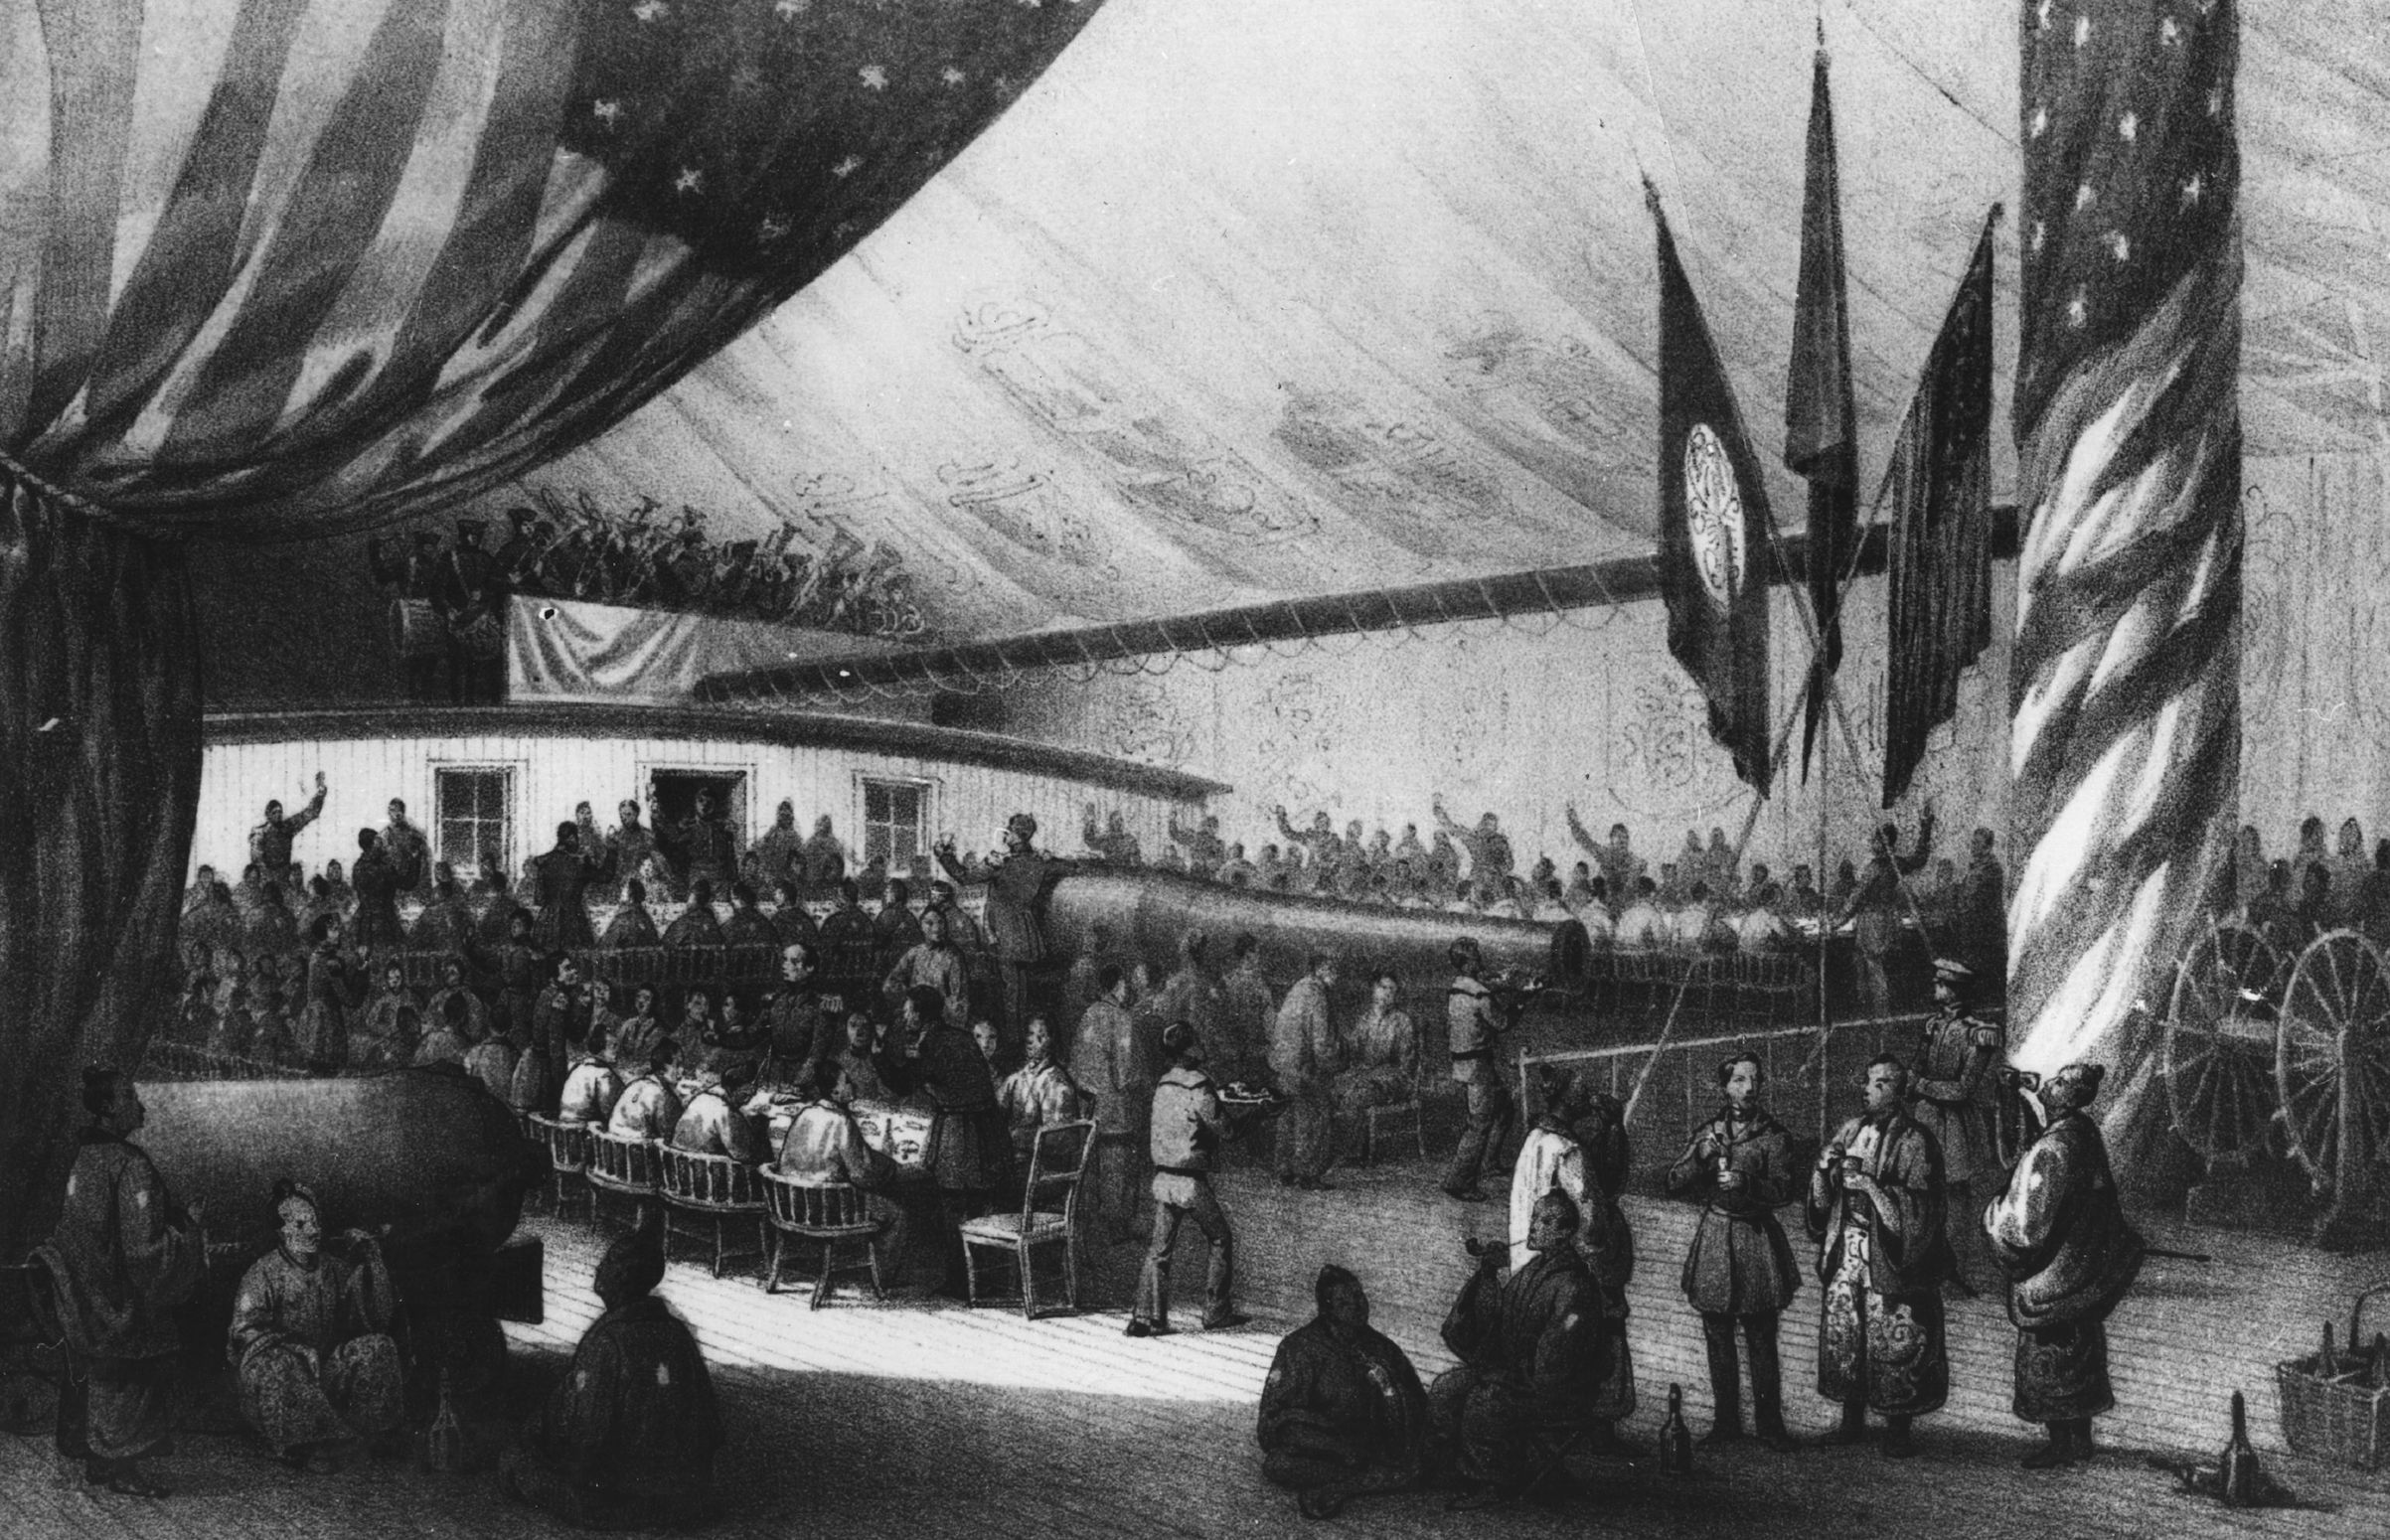 circa 1853: illustration of a dinner given in honor of the Japanese Commissioner on board the USSF Powhatan, during the naval expedition led by the US naval officer Matthew Galbraith Perry (1794 - 1858). (Hulton Archive/Getty Images)